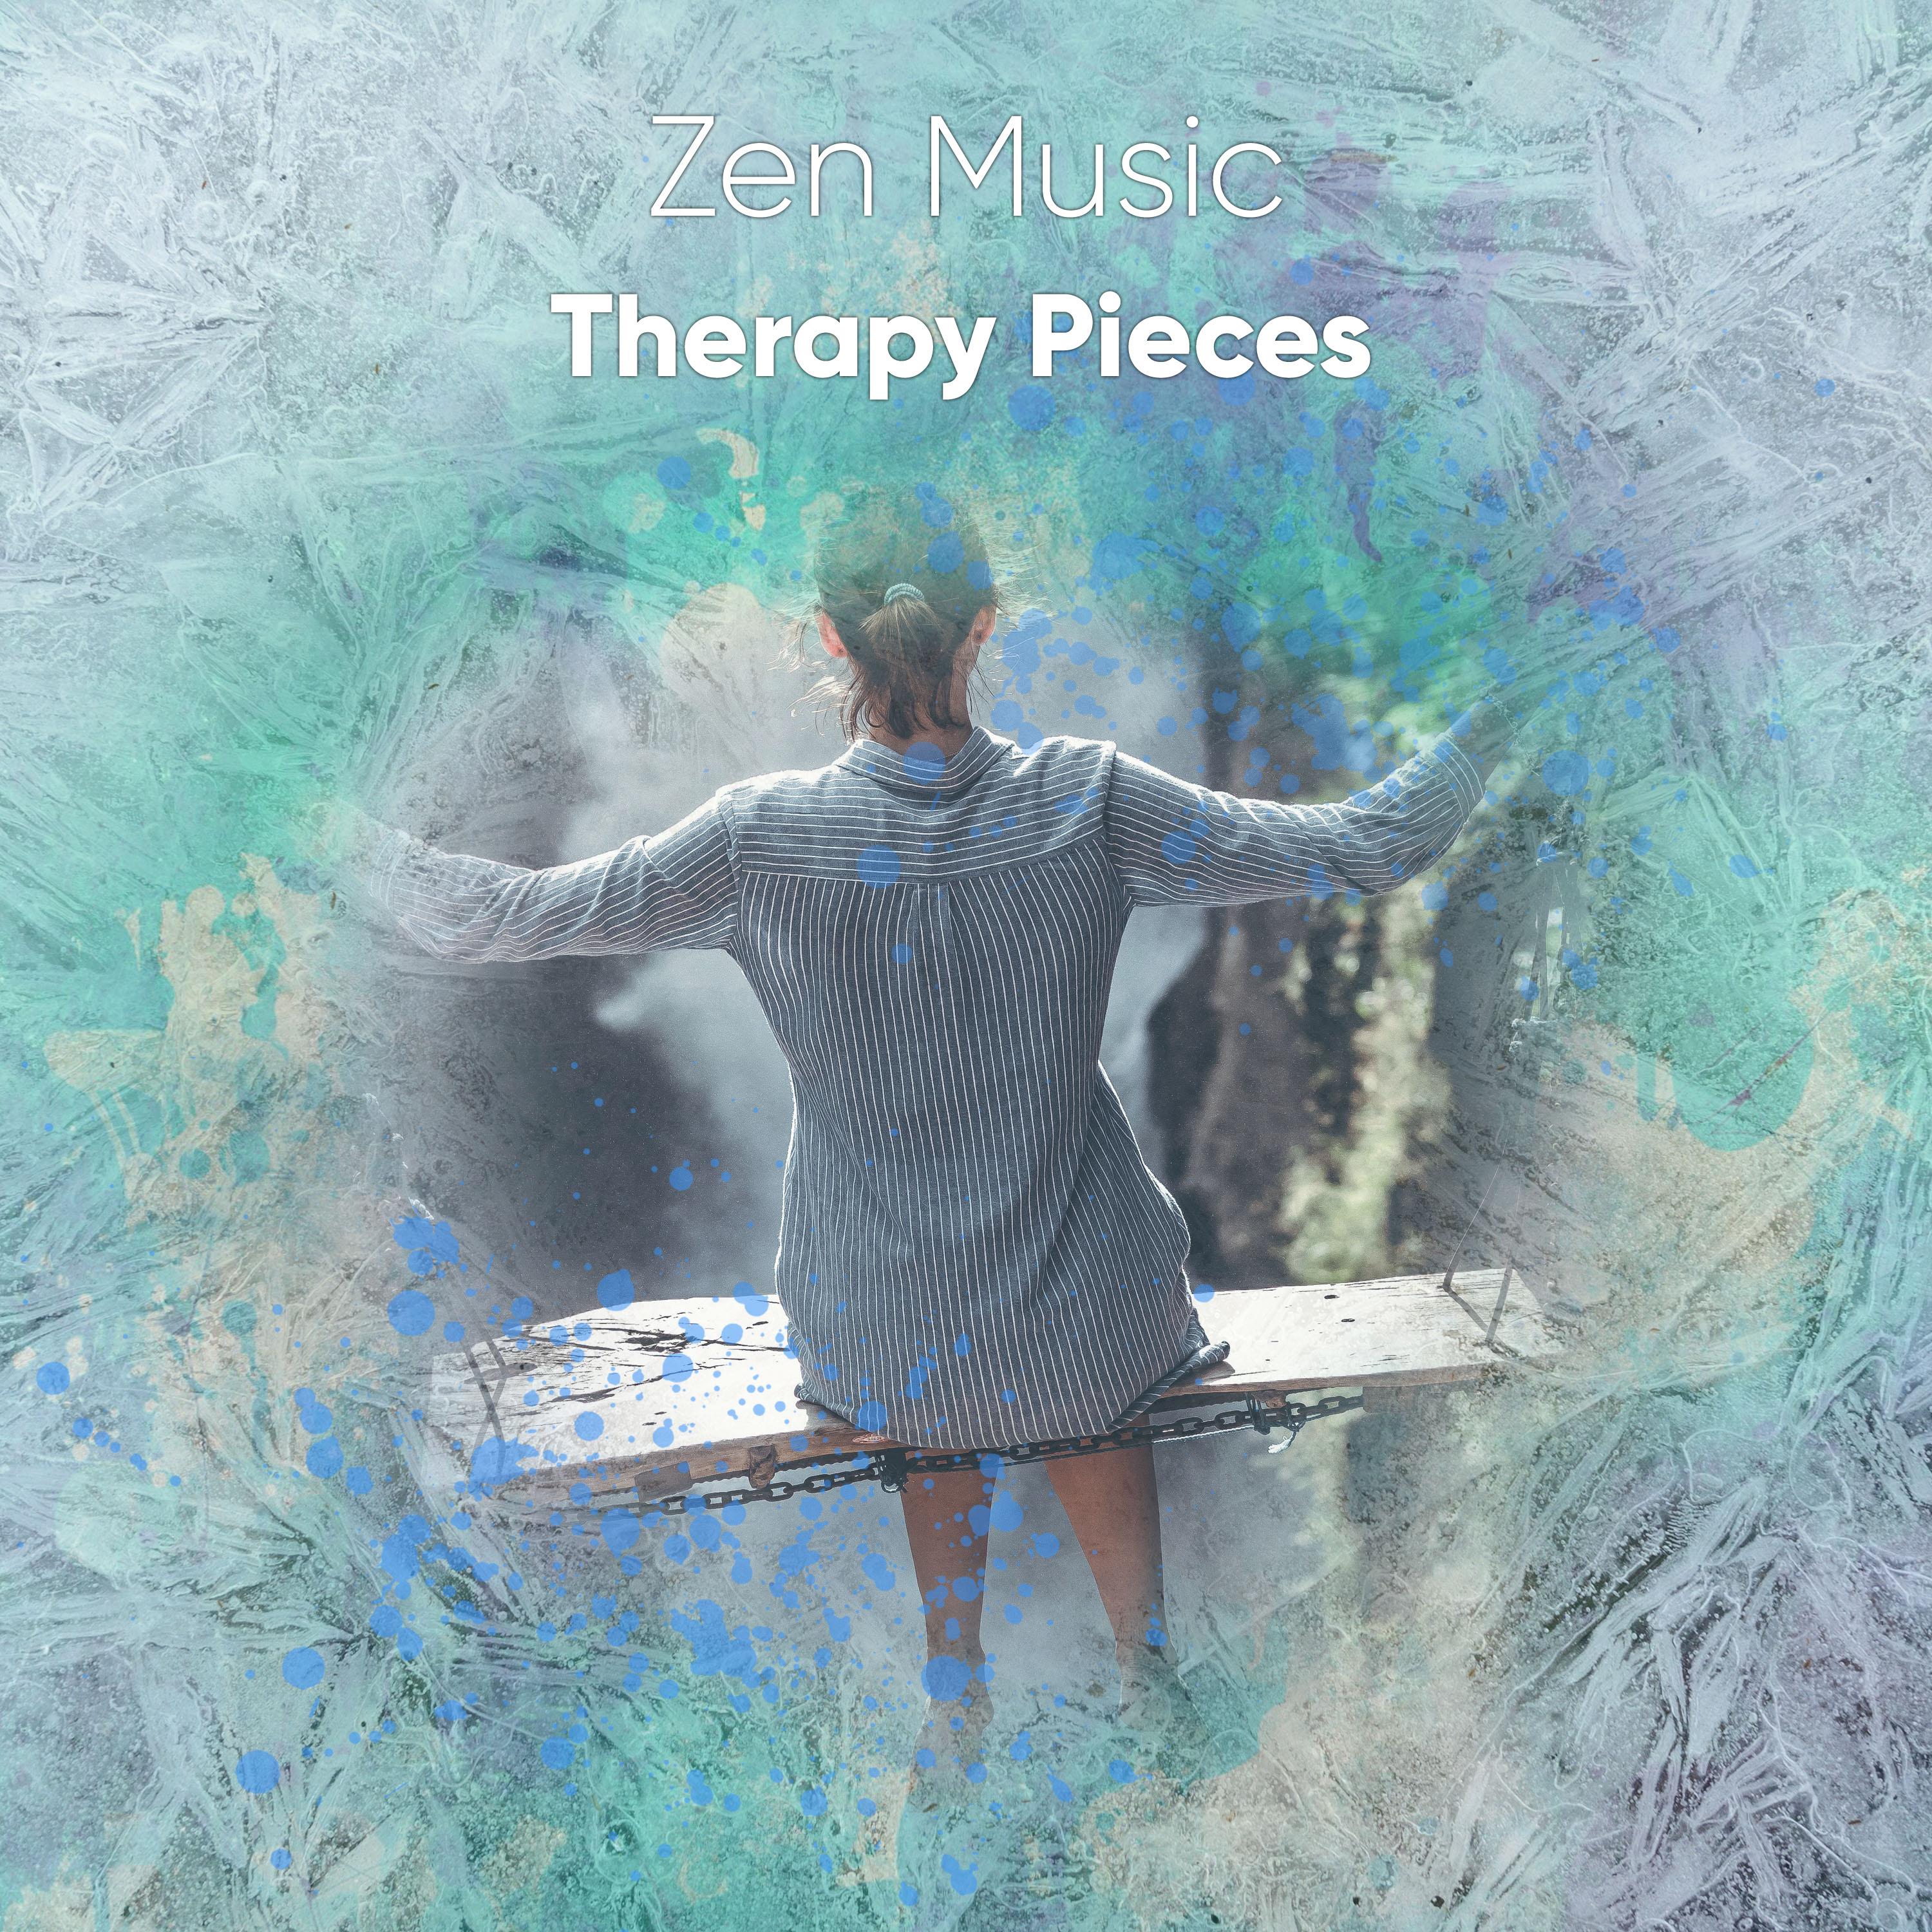 11 Zen Music Therapy Pieces